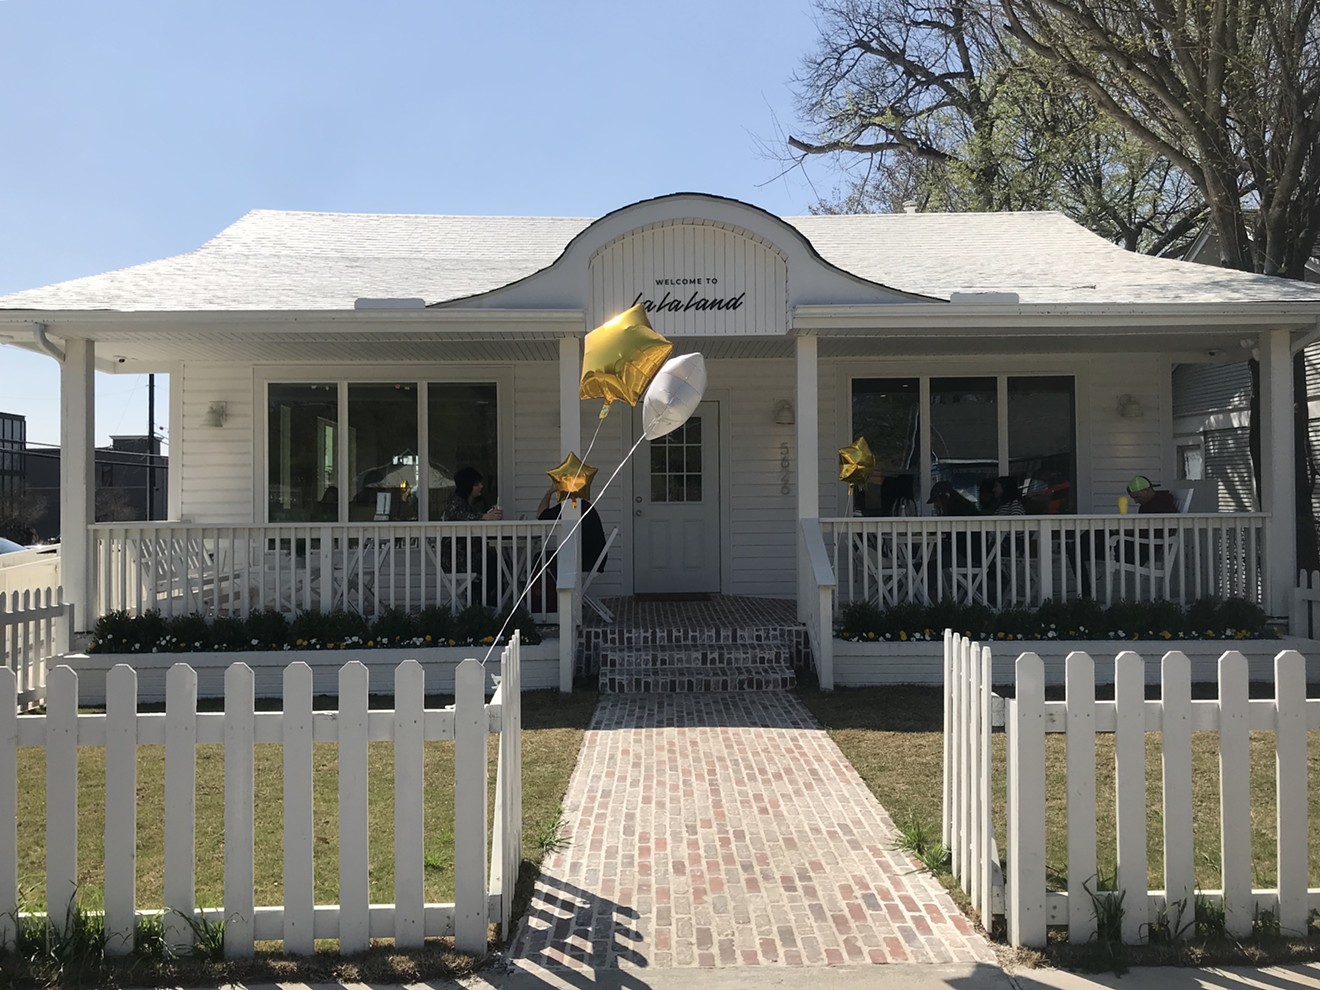 La La Land Kind Cafe opened this week in a sunny 100-year-old house just off Lowest Greenville.